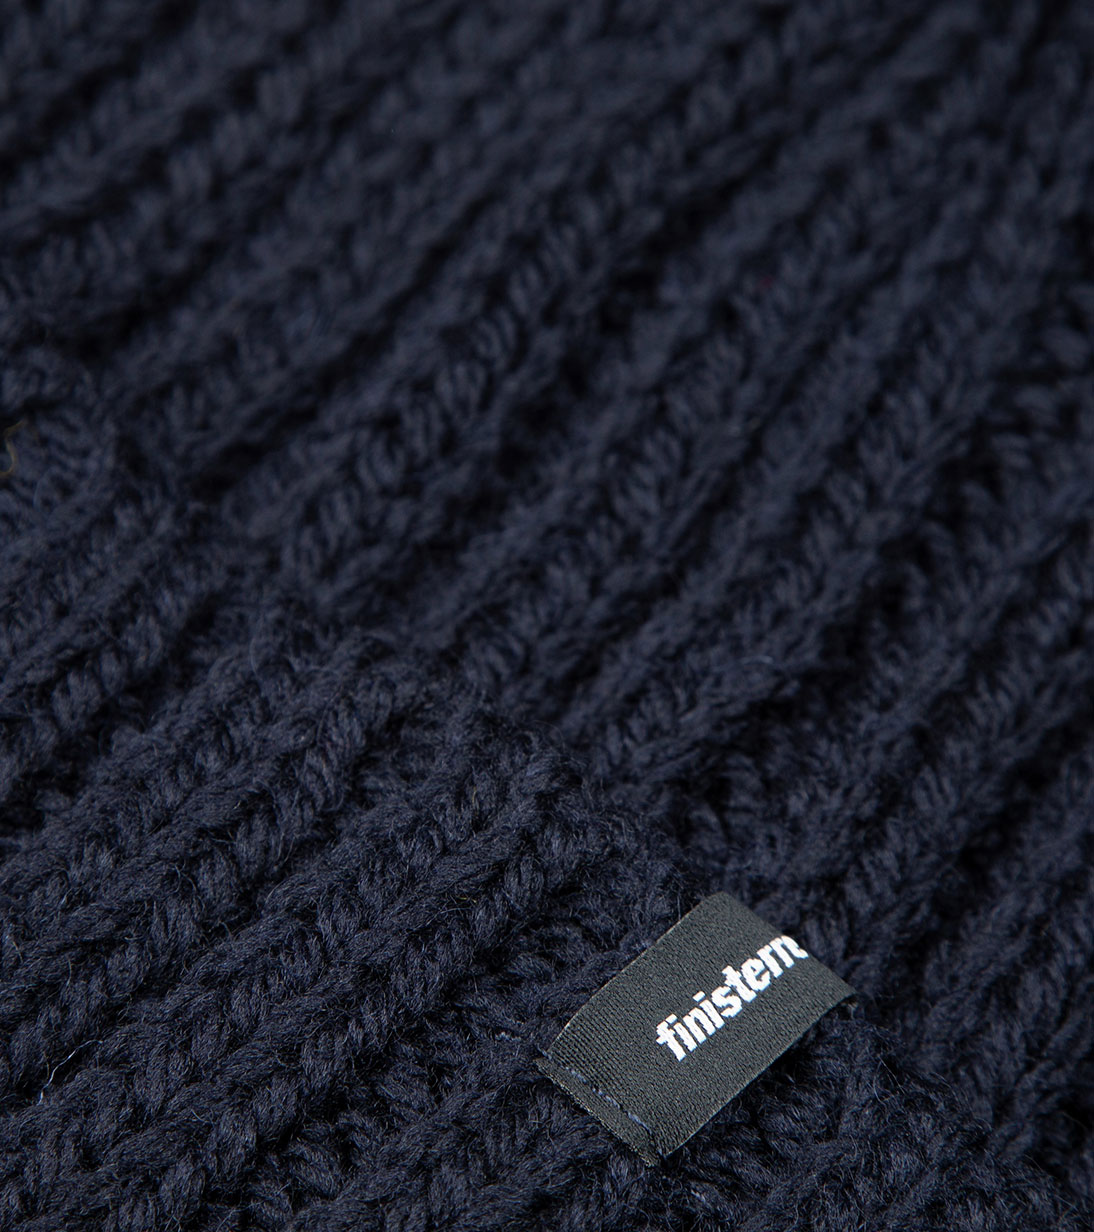 Made from: 100% Donegal merino wool